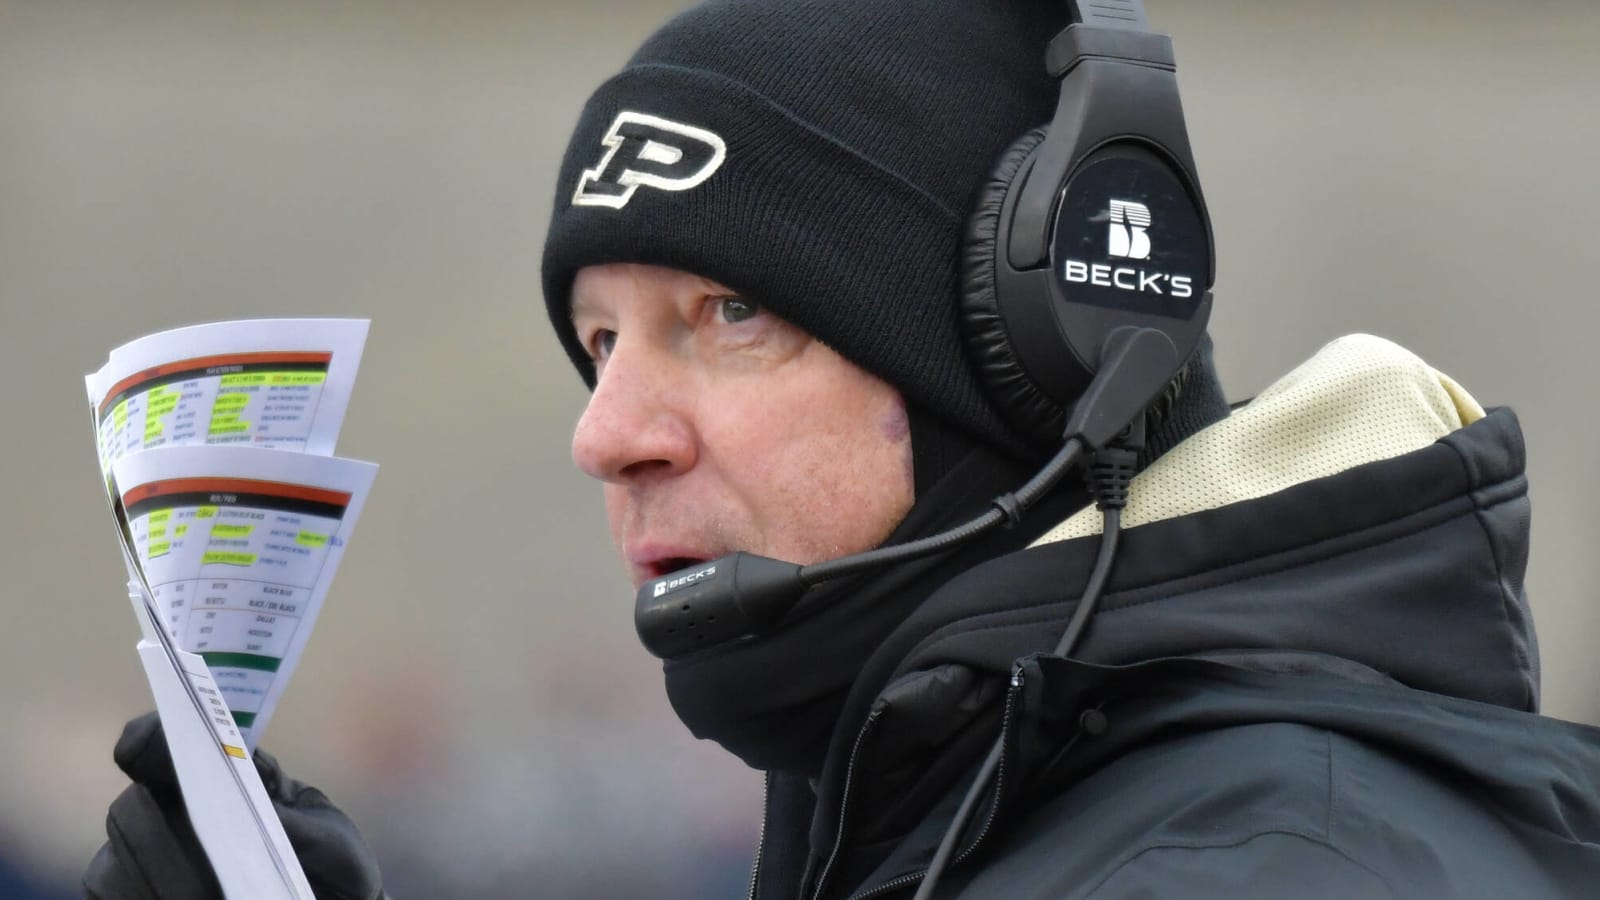 Purdue coach blames Ohio State for new recruiting rule